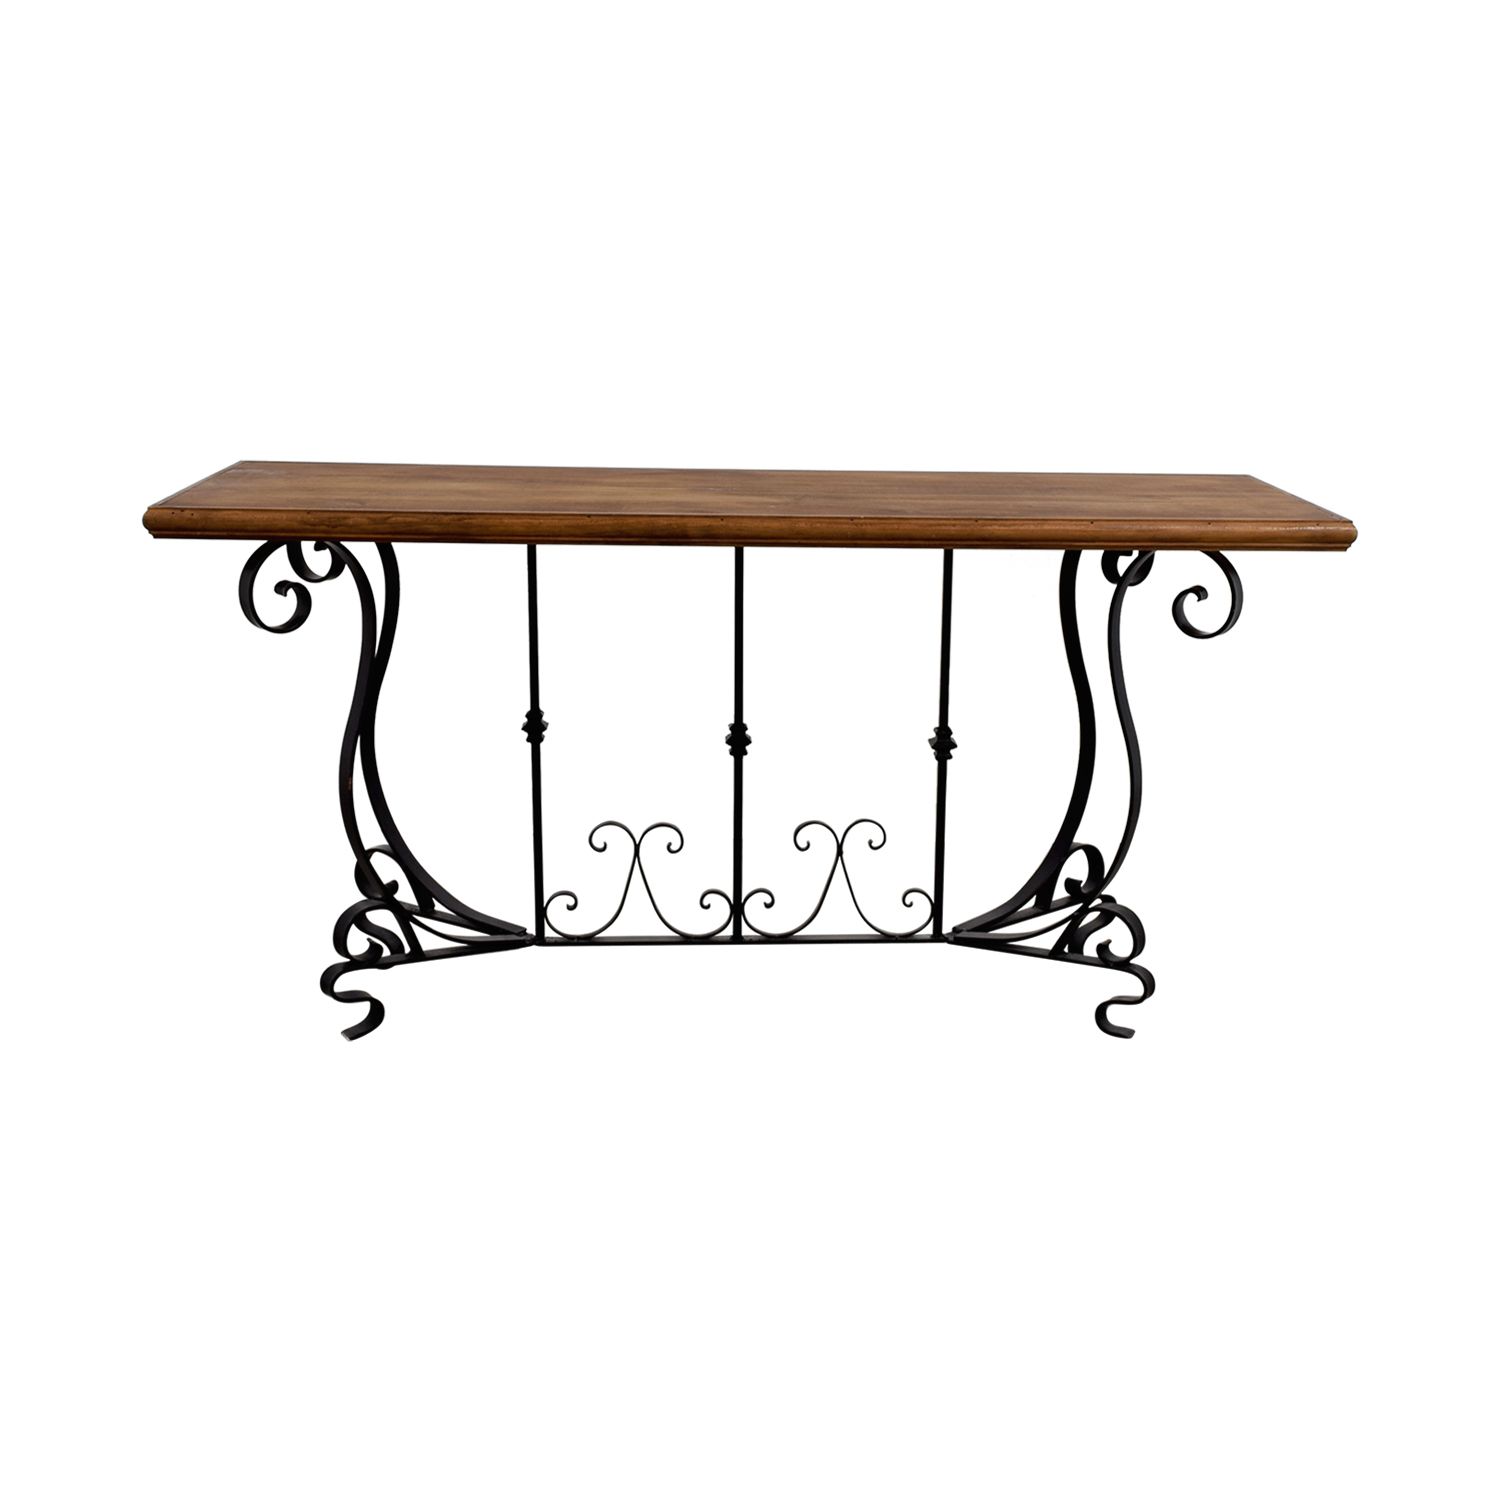 90% Off – Black Iron Scroll Base And Rustic Wood Console Pertaining To Black Metal Console Tables (View 5 of 20)